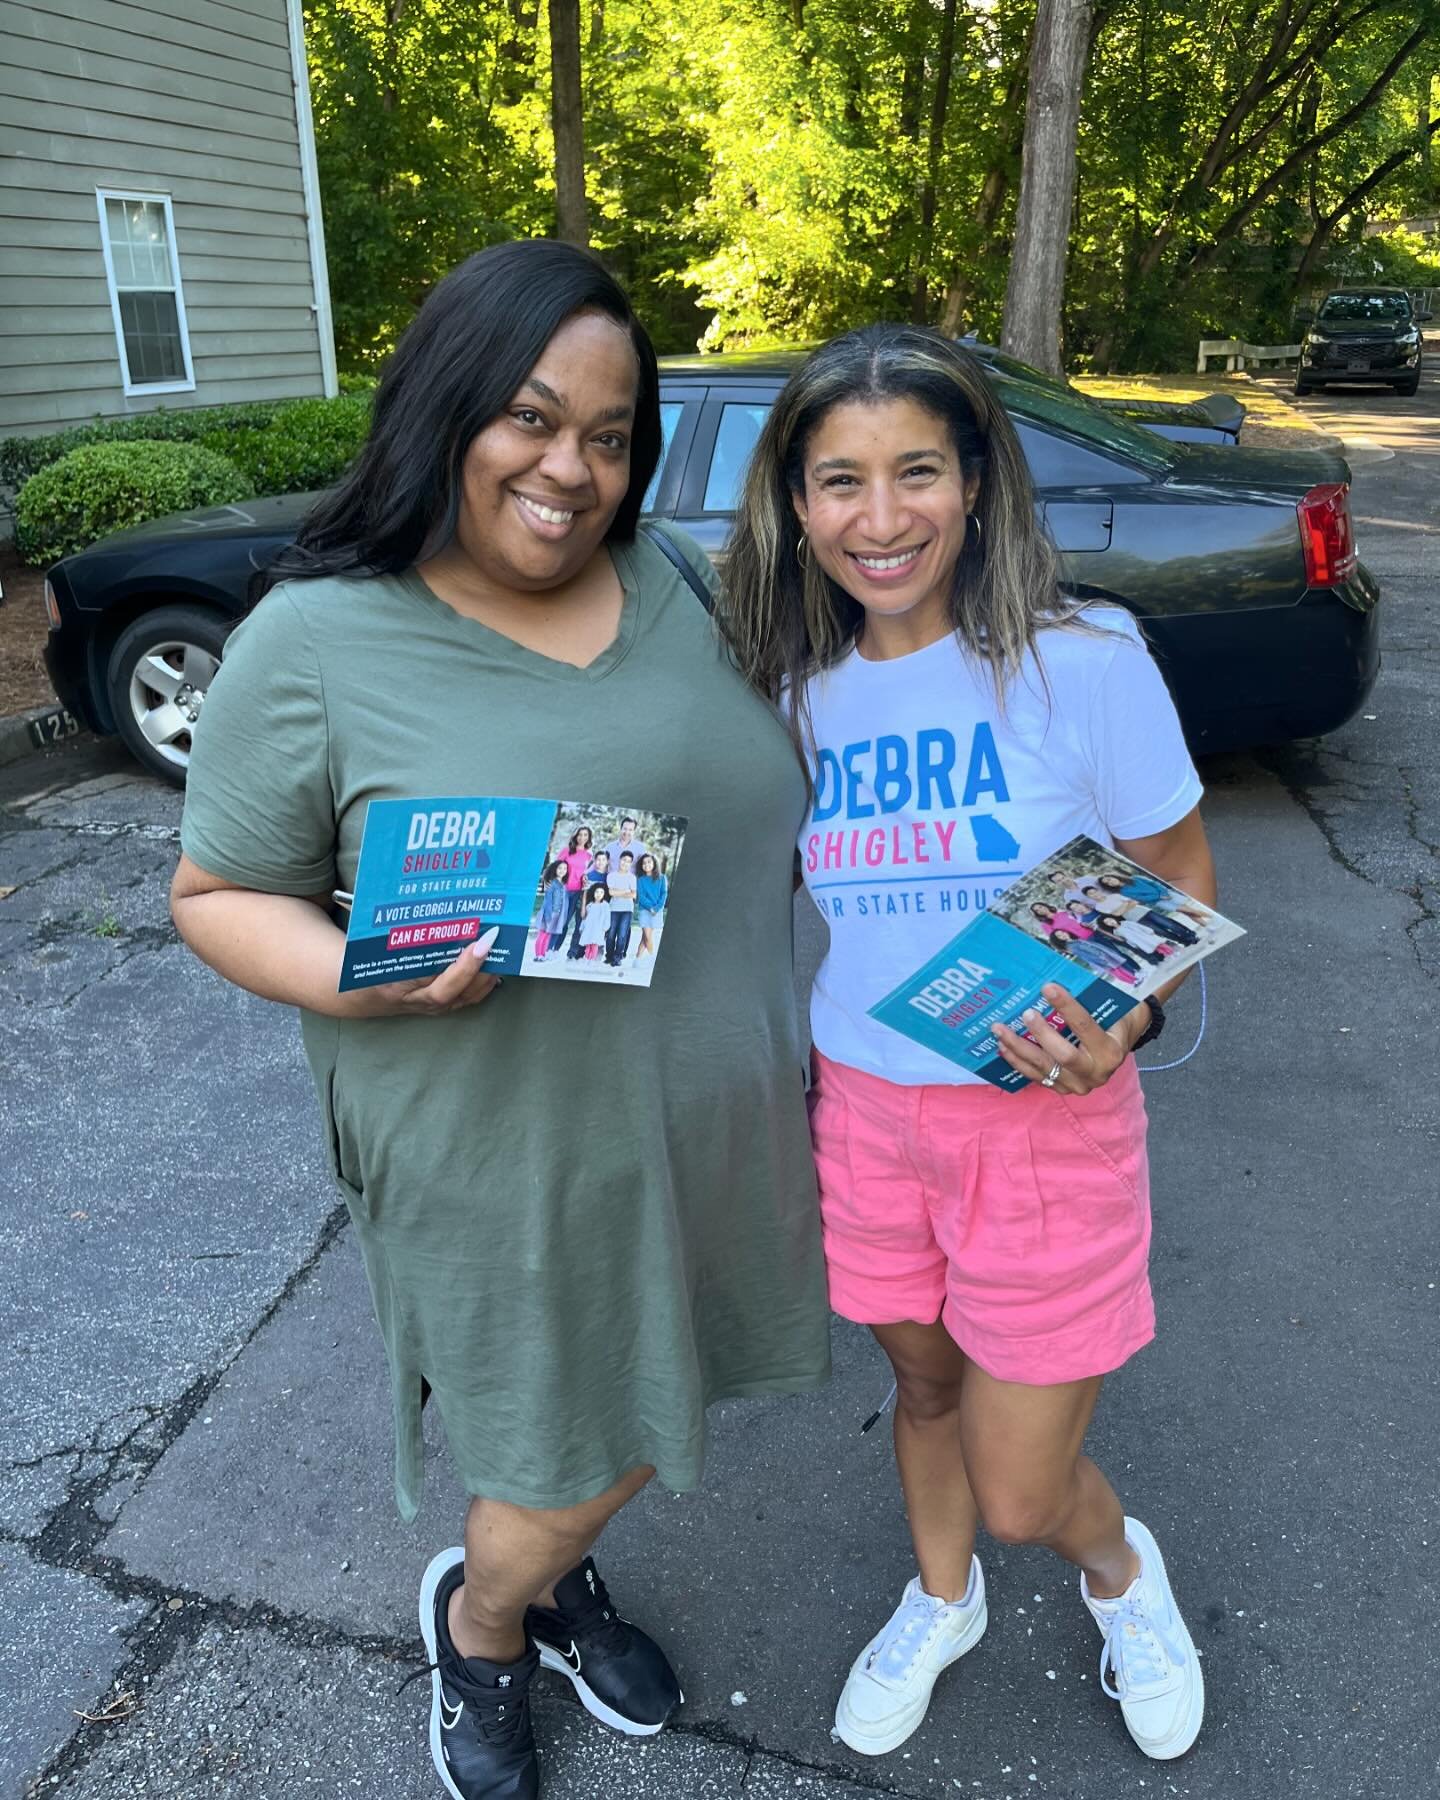 Knock, knock! It was such a pleasure to meet Robin today while canvassing. This is what it&rsquo;s all about&mdash; connecting with our neighbors and talking about our shared values. 

Thank you for taking the time to chat and for your support @gospe